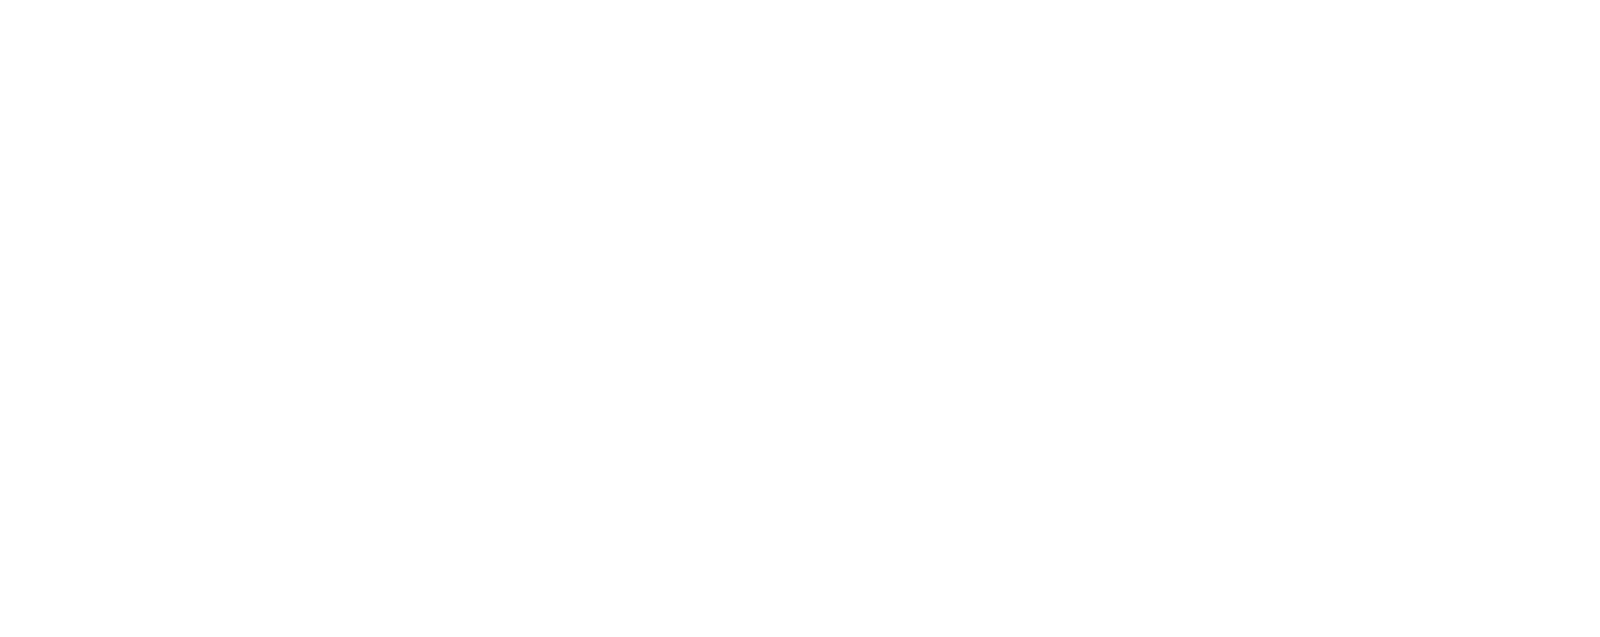 03_casino-holdem-logo-2-rows-fill-only_casinoholdem.png thumbnail